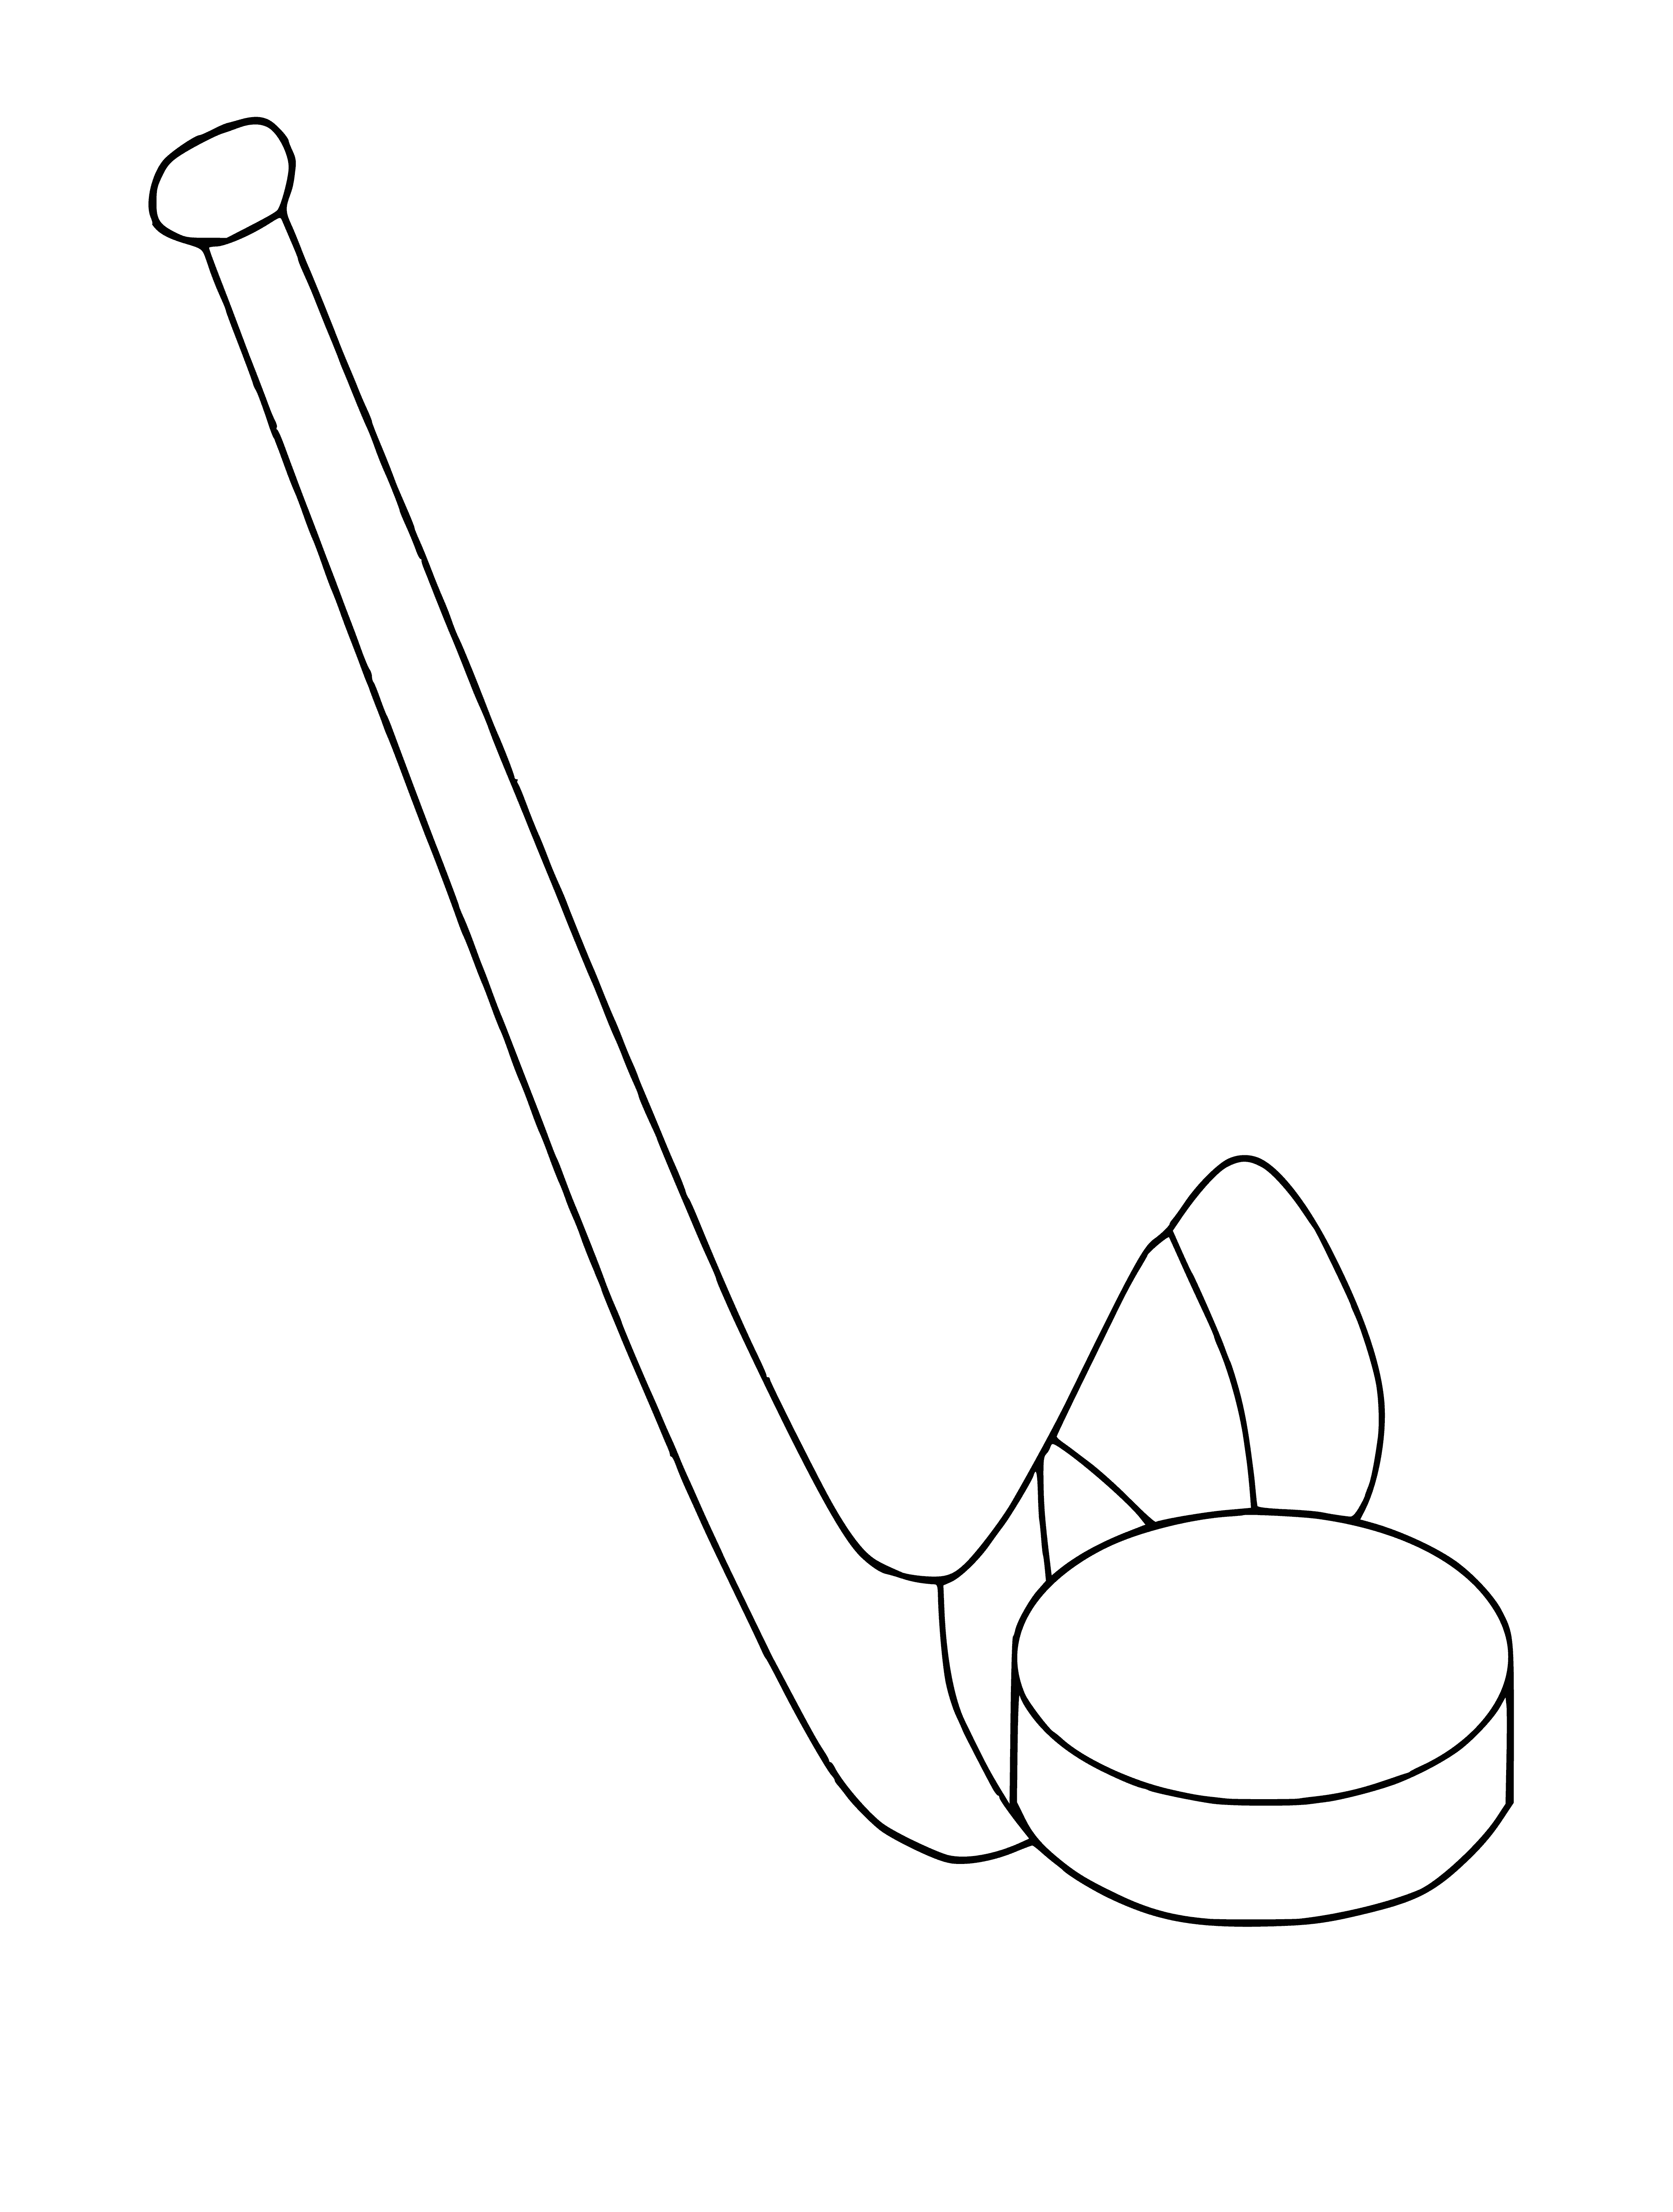 coloring page: Players use a wooden/composite/metal stick to hit a round, black rubber puck in hockey.